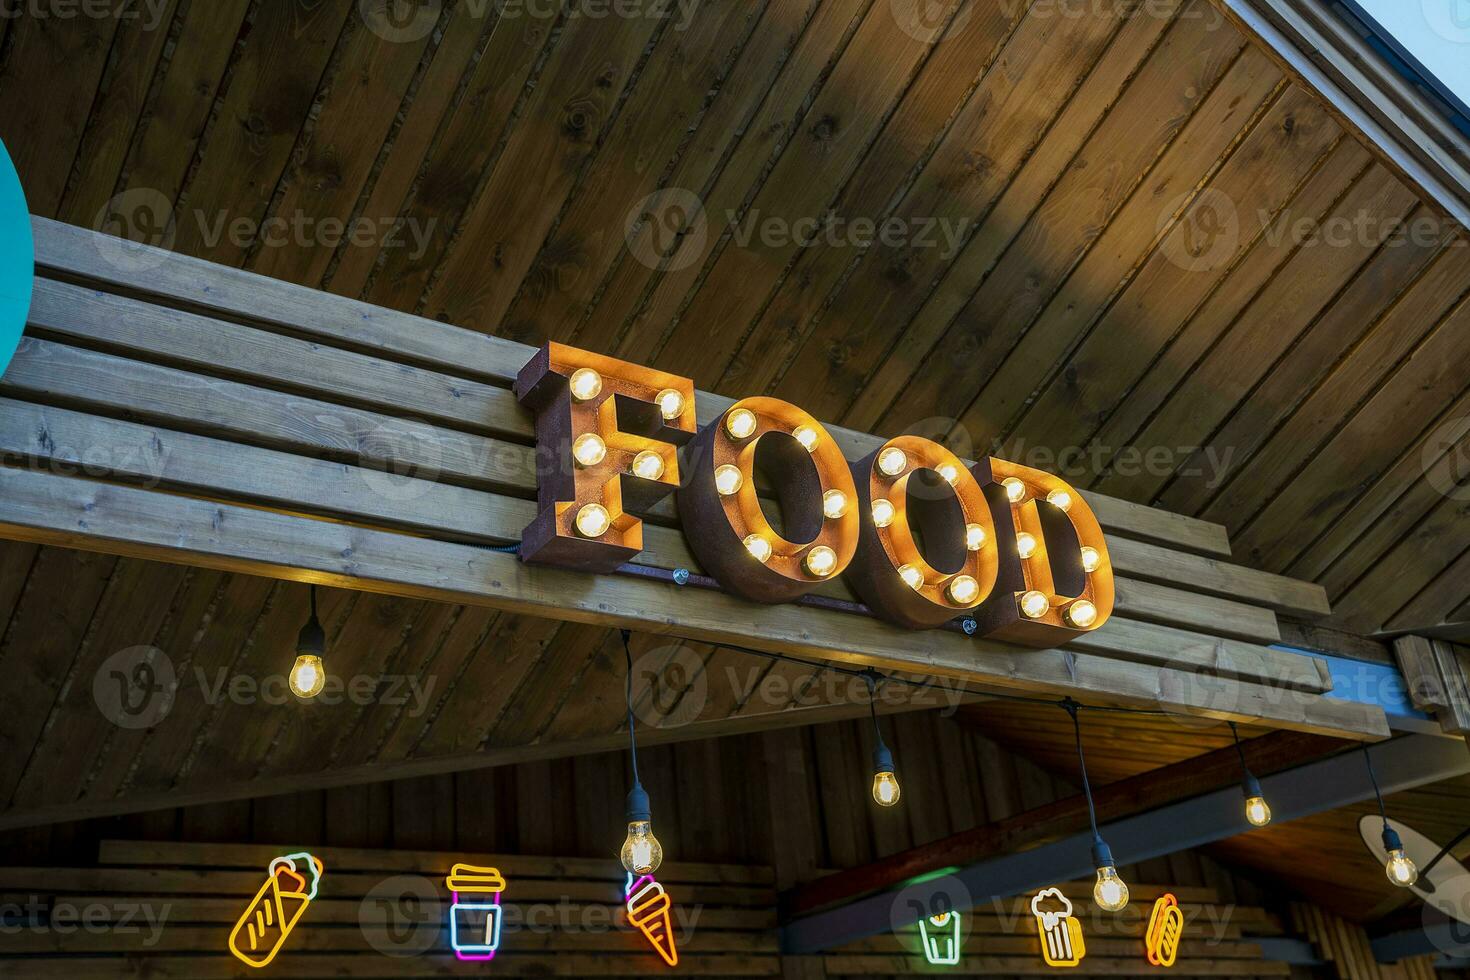 the glowing street sign of the FOOD street cafe photo